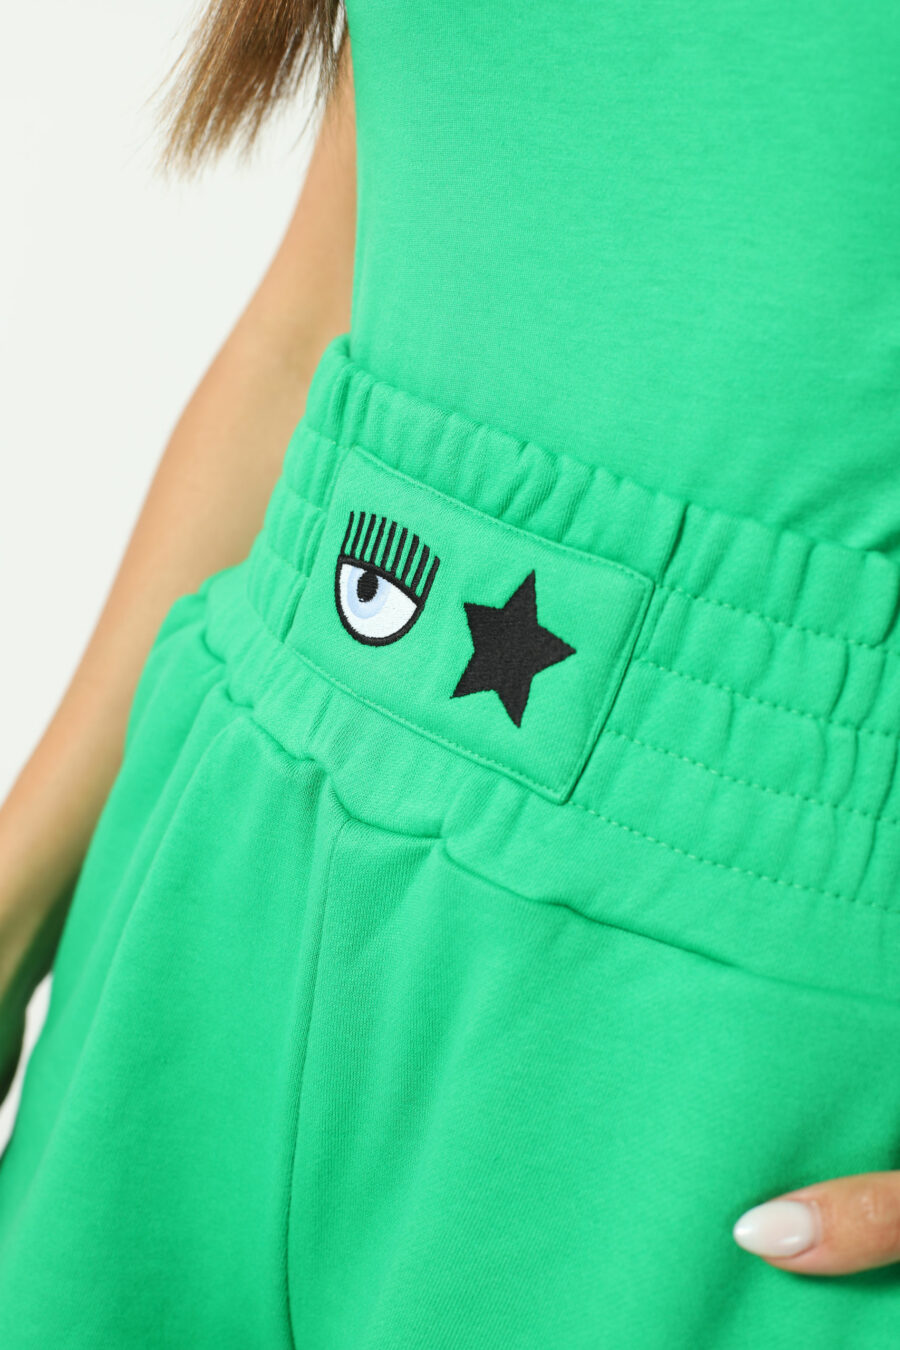 Tracksuit bottoms green shorts with eye and star logo - Photos 2581